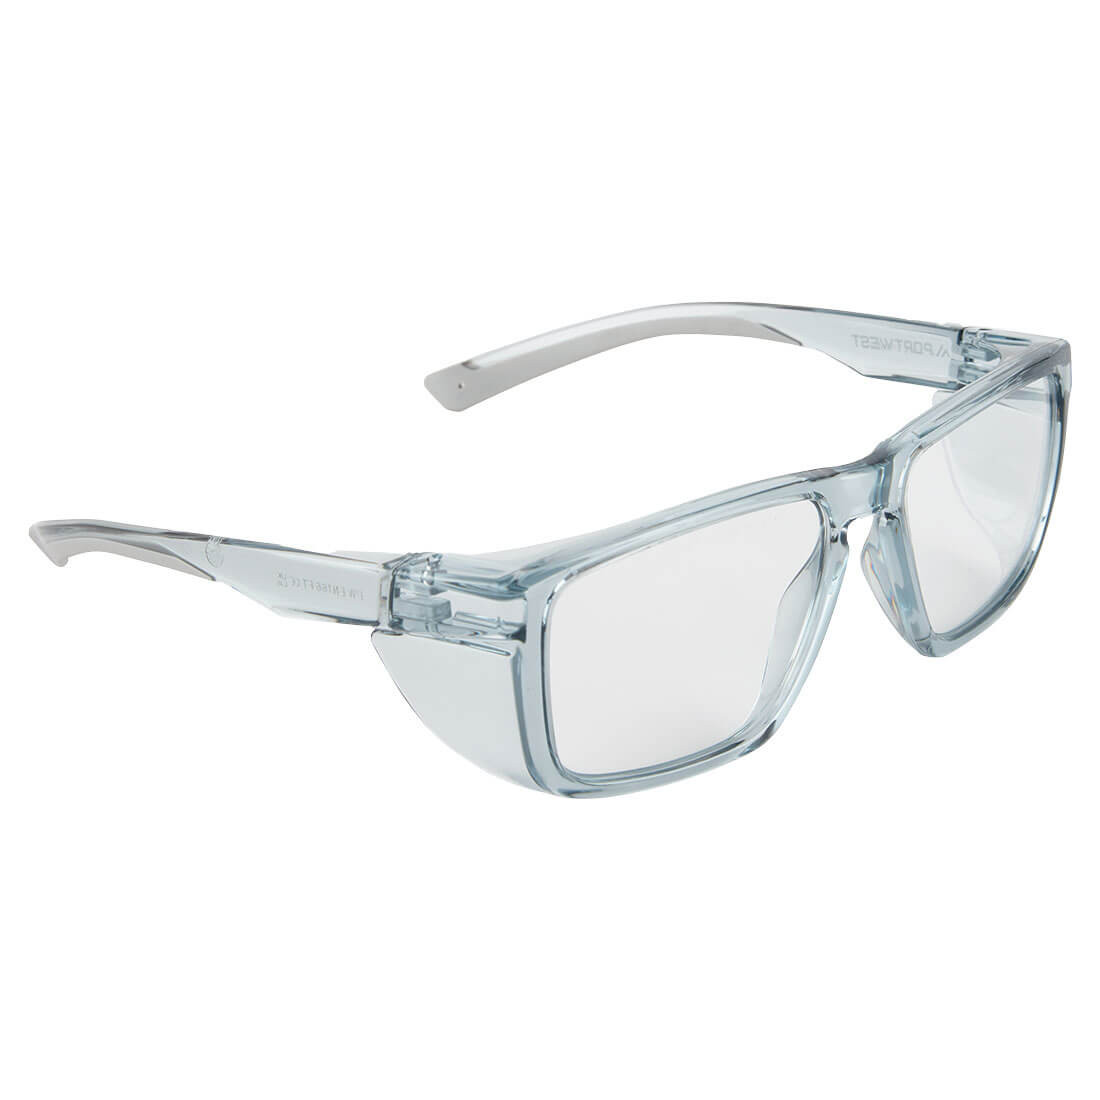 Side Shields Safety Glasses - Personal protection